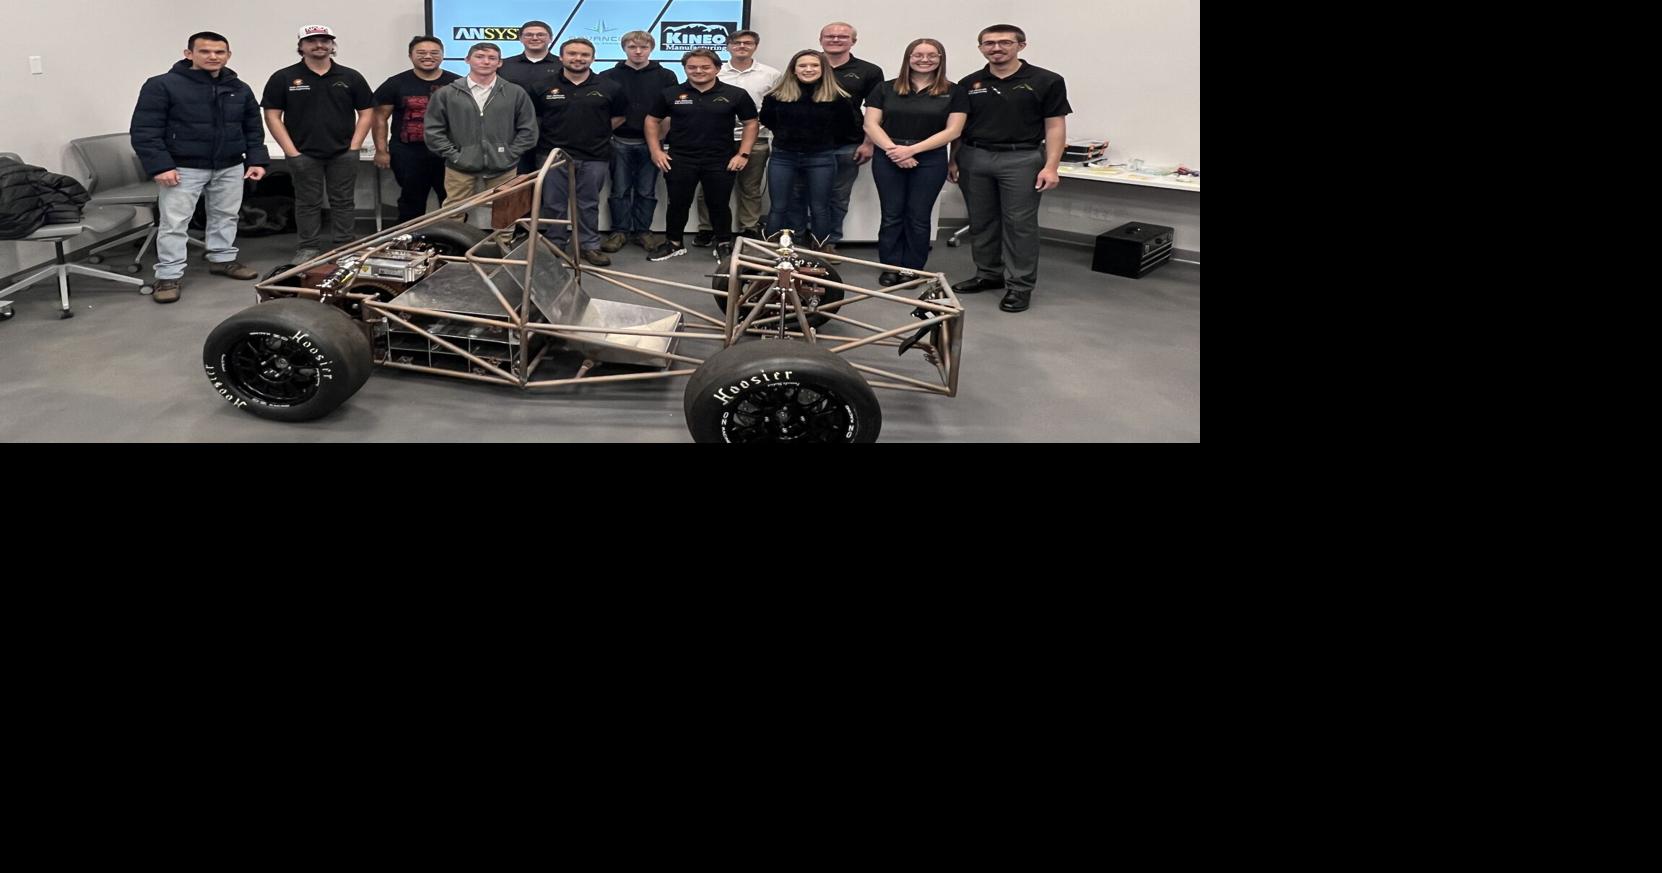 UCCS’ High Altitude Race Engineering team celebrates first with new vehicle ‘Jalopy’ | Education